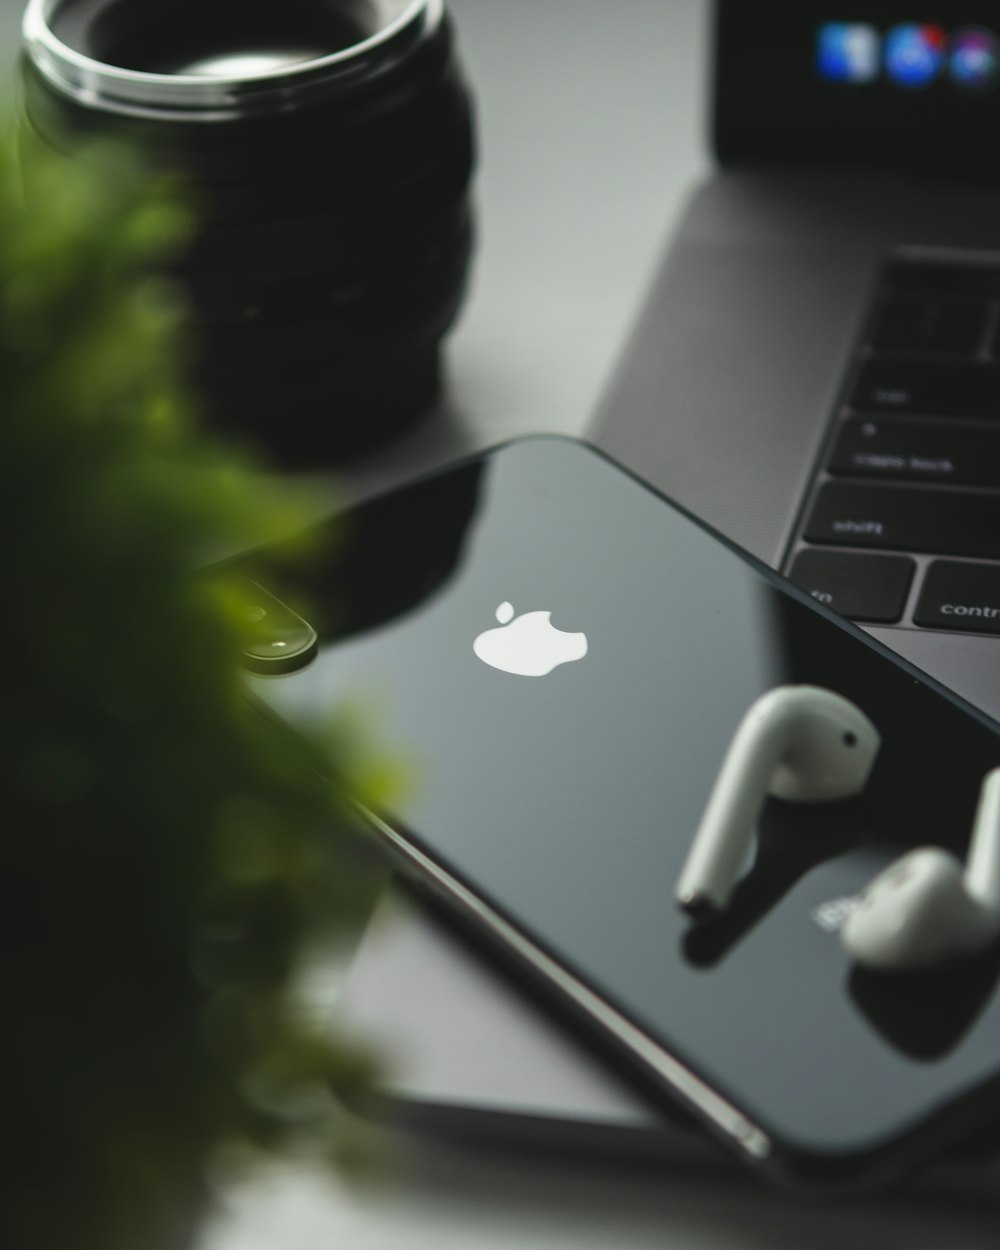 space gray iPhone X and Apple AirPods on MacBook Pro photo – Free Grey  Image on Unsplash